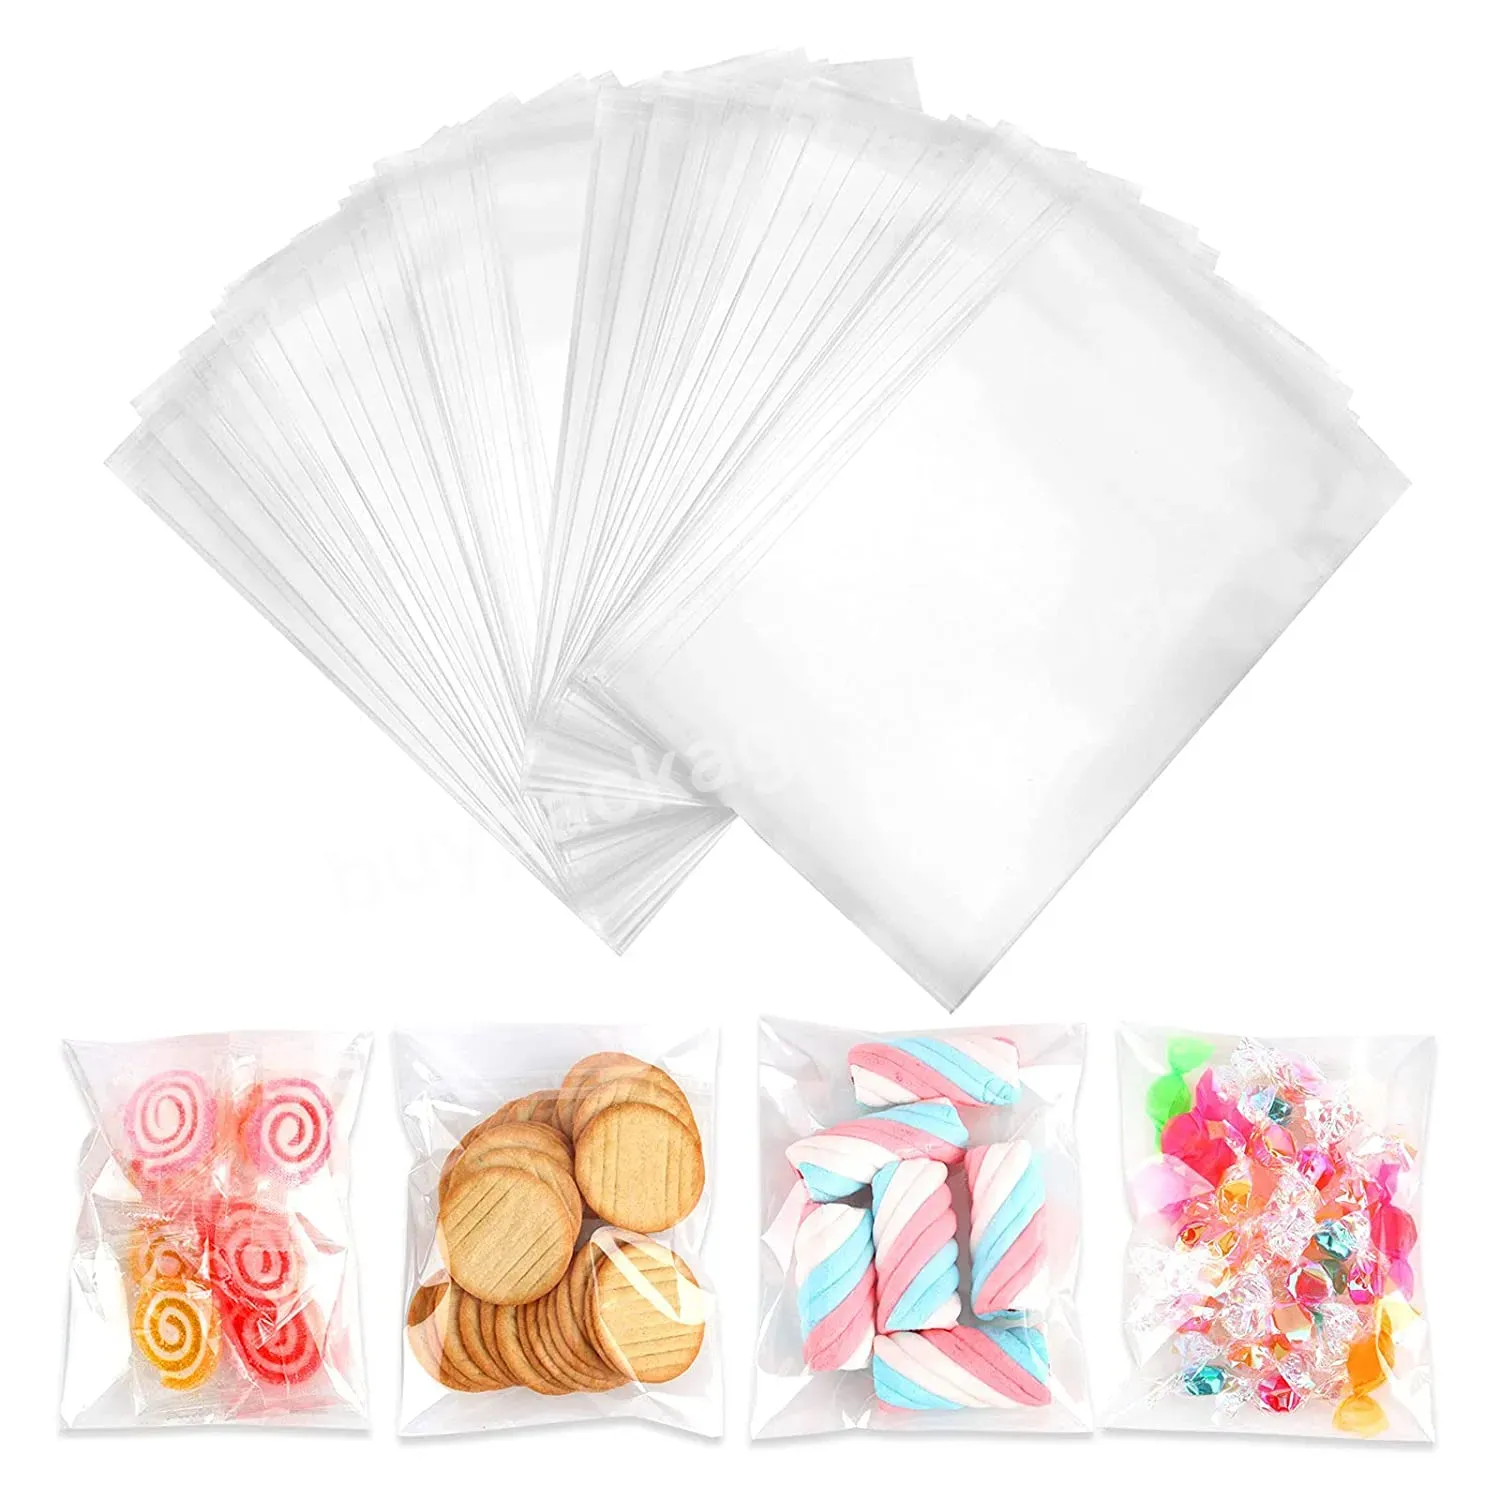 Wholesale Customized Self Seal Adhesive Bopp Pp Opp Poly Plastic Cello Packaging Bags For Cellophane Candy Garment Clothing - Buy Plastic Packaging Bag,Custom Plastic Bag,Transparent Plastic Bag.